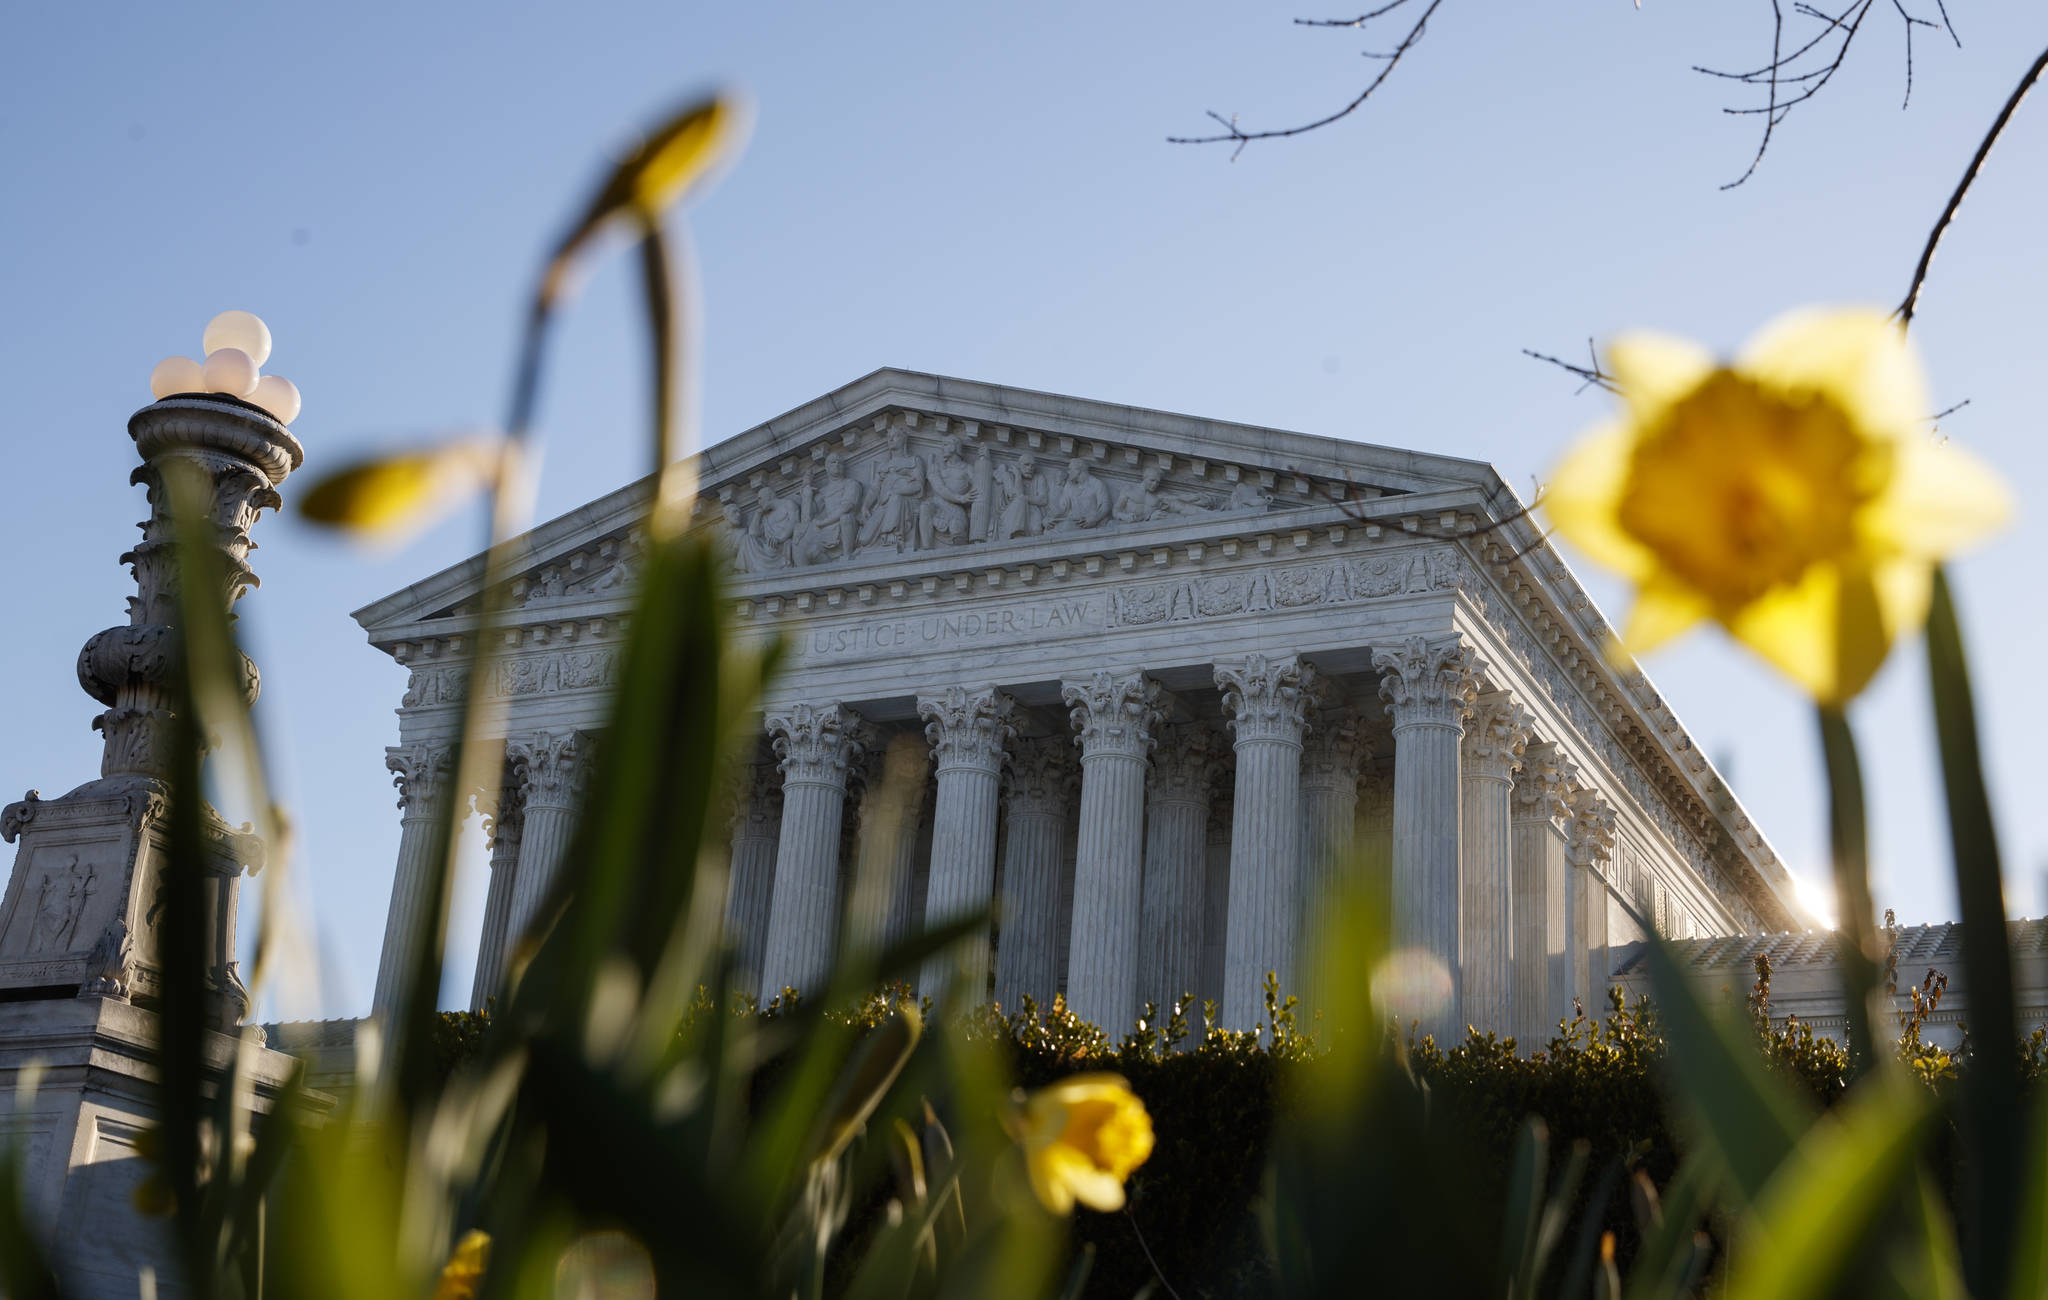 The Supreme Court building is seen on Capitol Hill in Washington on Tuesday, March 26, 2019. (Carolyn Kaster | Associated Press)